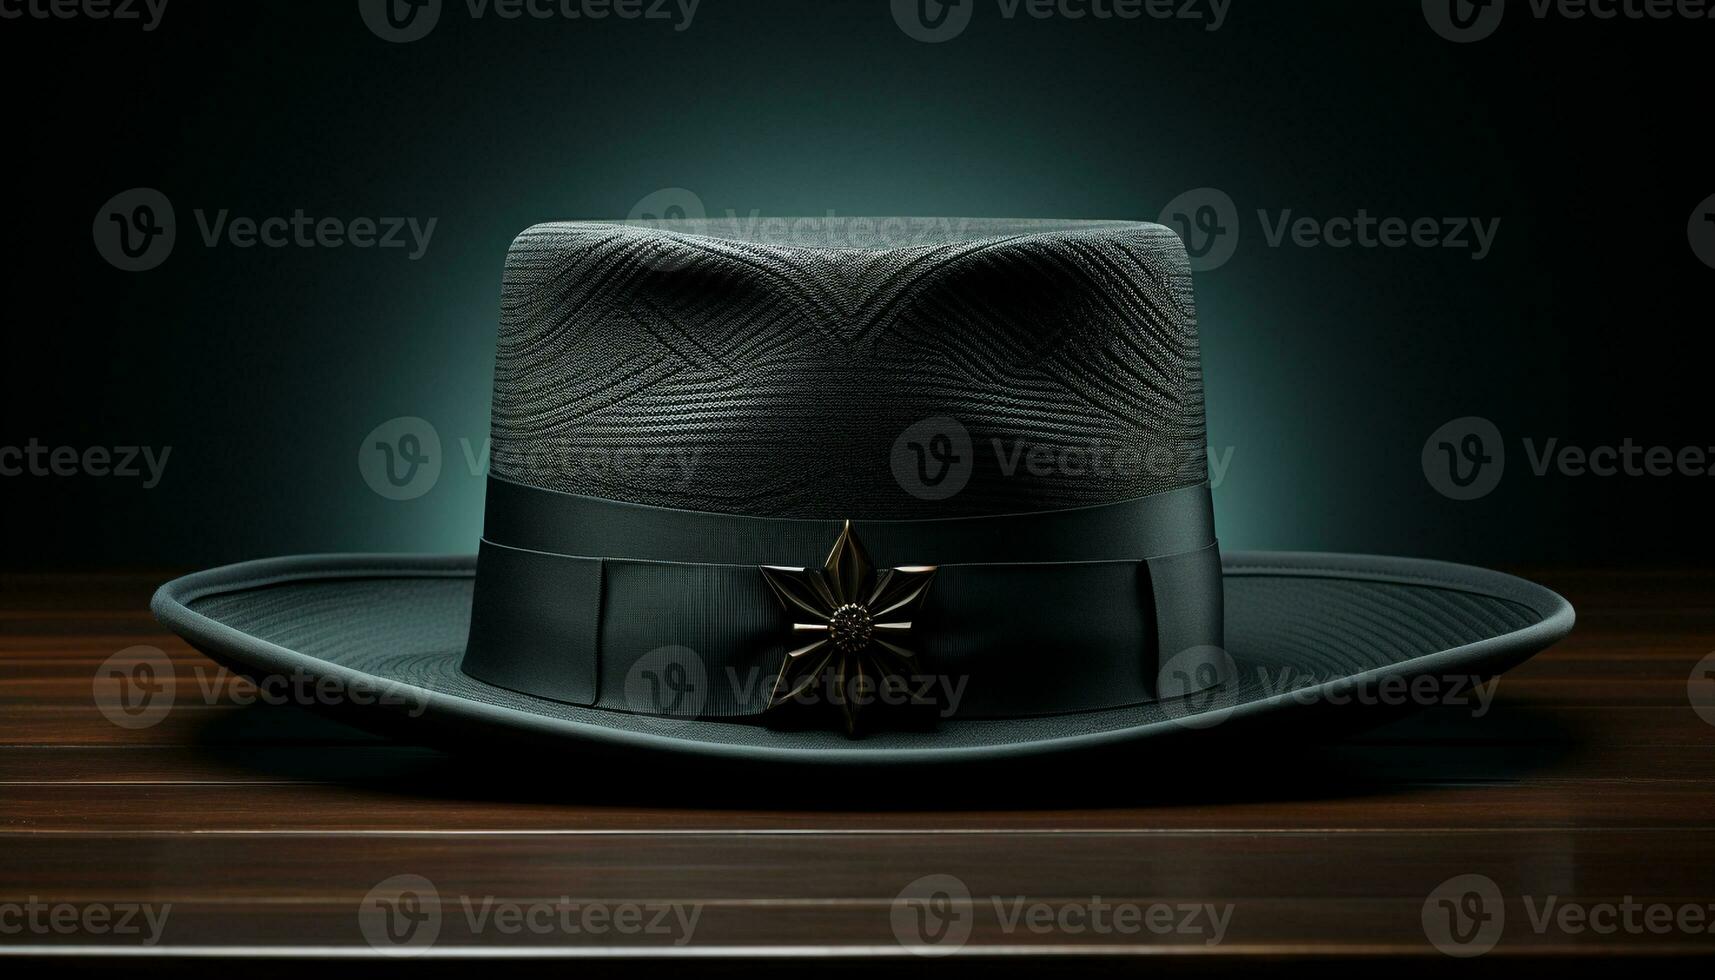 Fashionable men wear elegant fedoras, adding a touch of mystery generated by AI photo